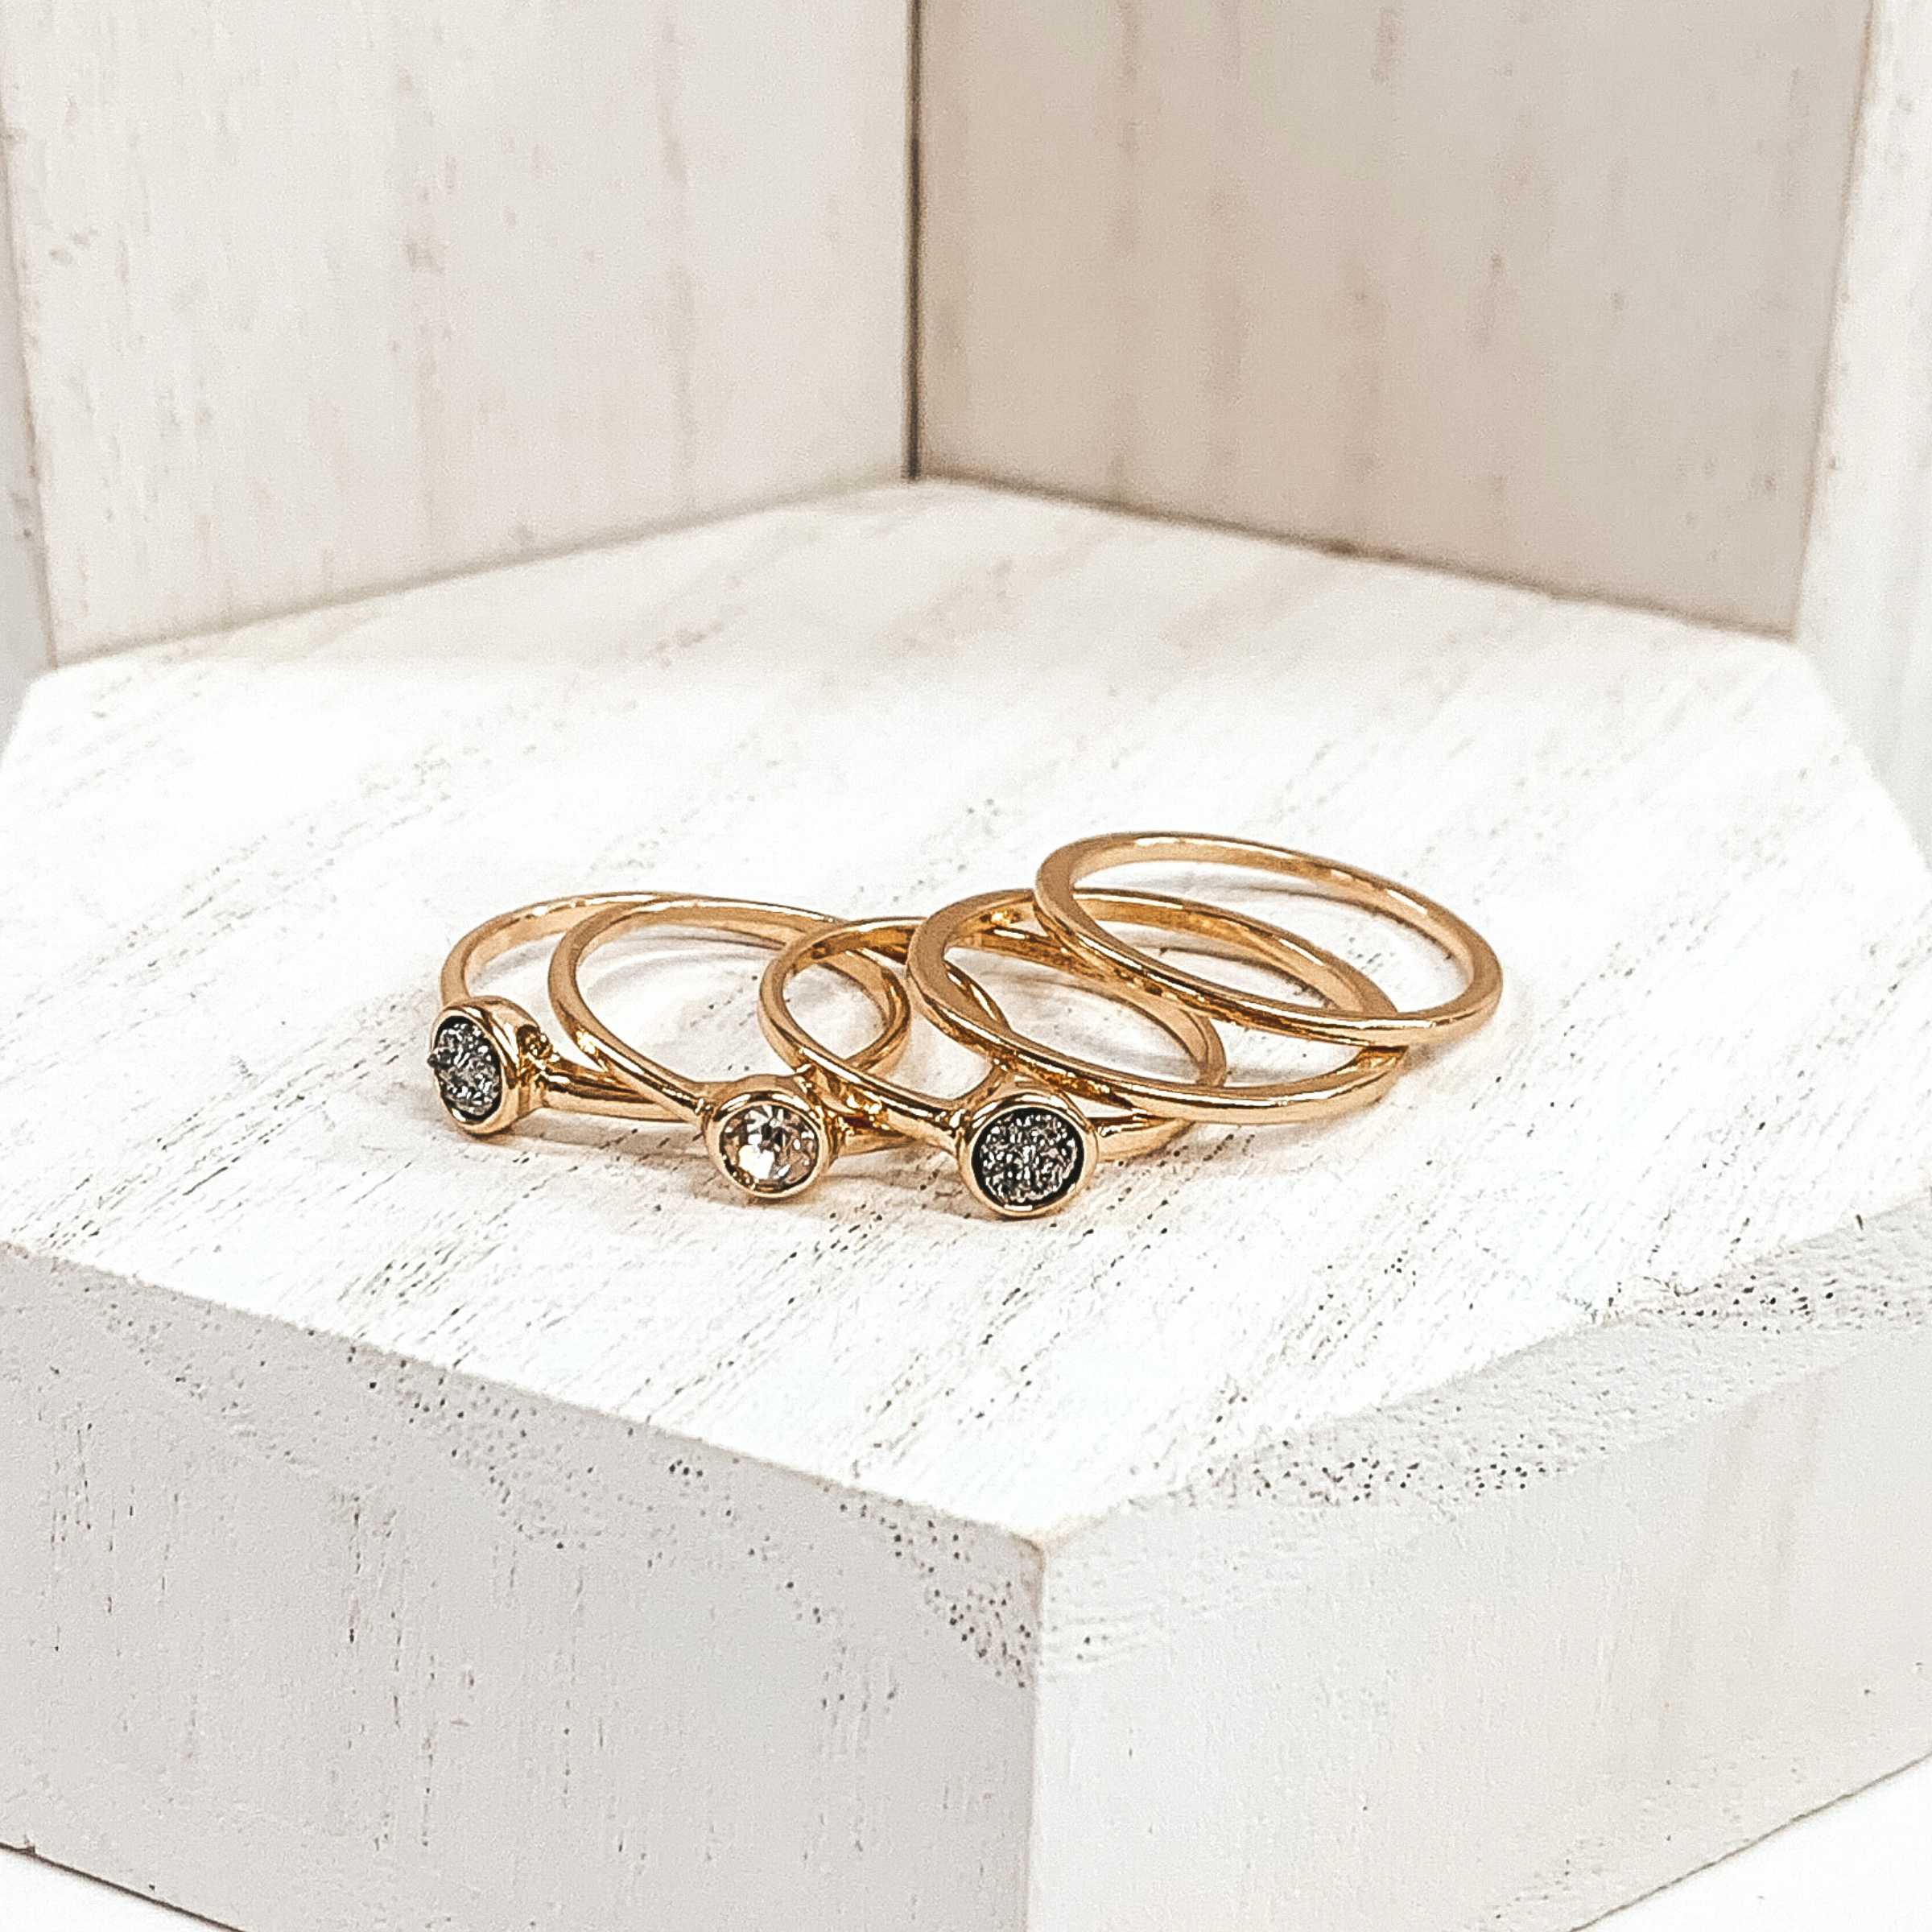 This is a set of 5 gold rings. Two rings are plain gold bands, one has a clear crystal stone, and the other two rings have grey druzy stones. These rings are pictured on a white background.